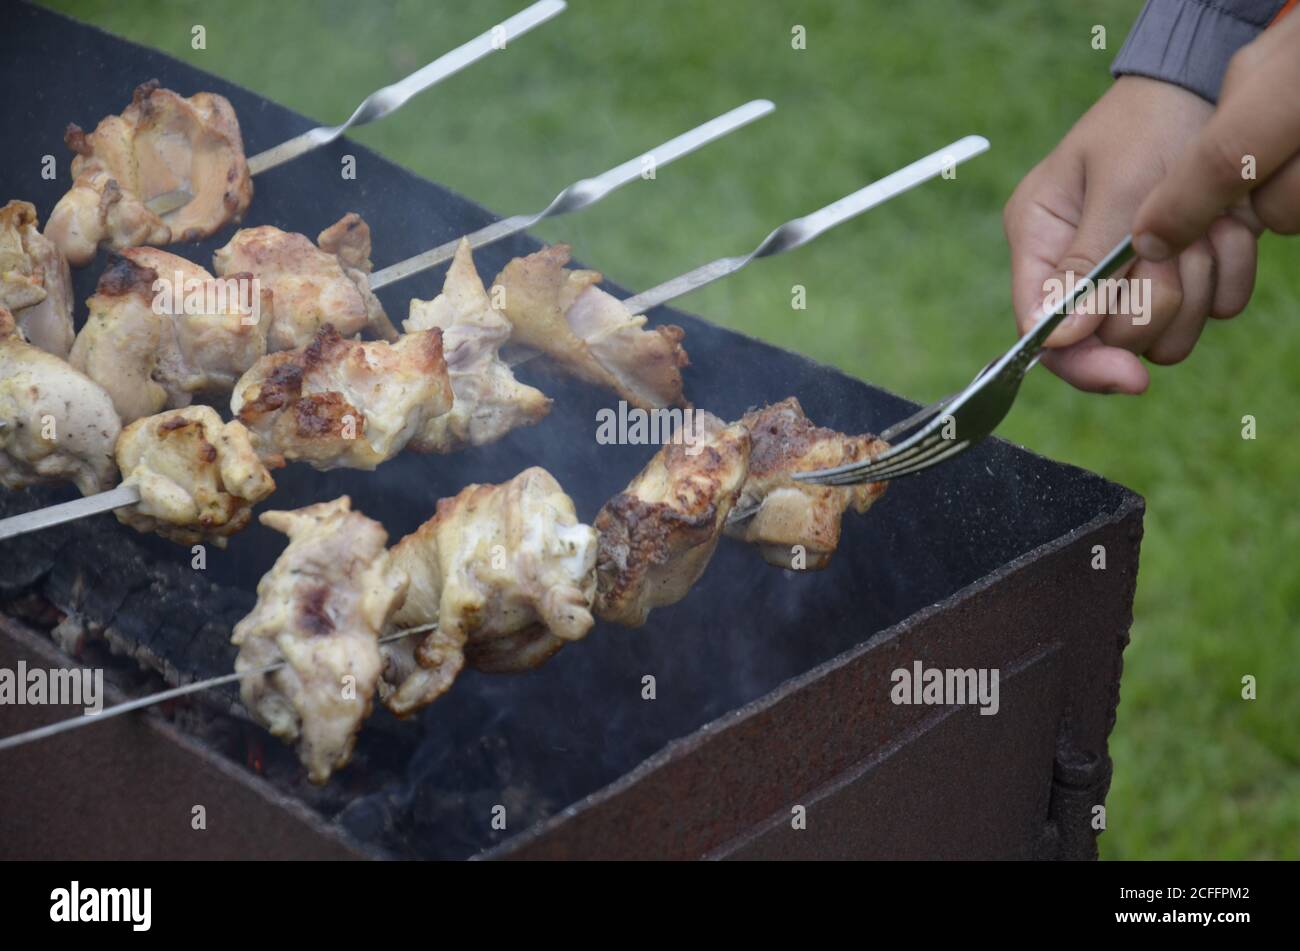 Cooking chicken skewers. In a hand fork and a skewer.  Stock Photo